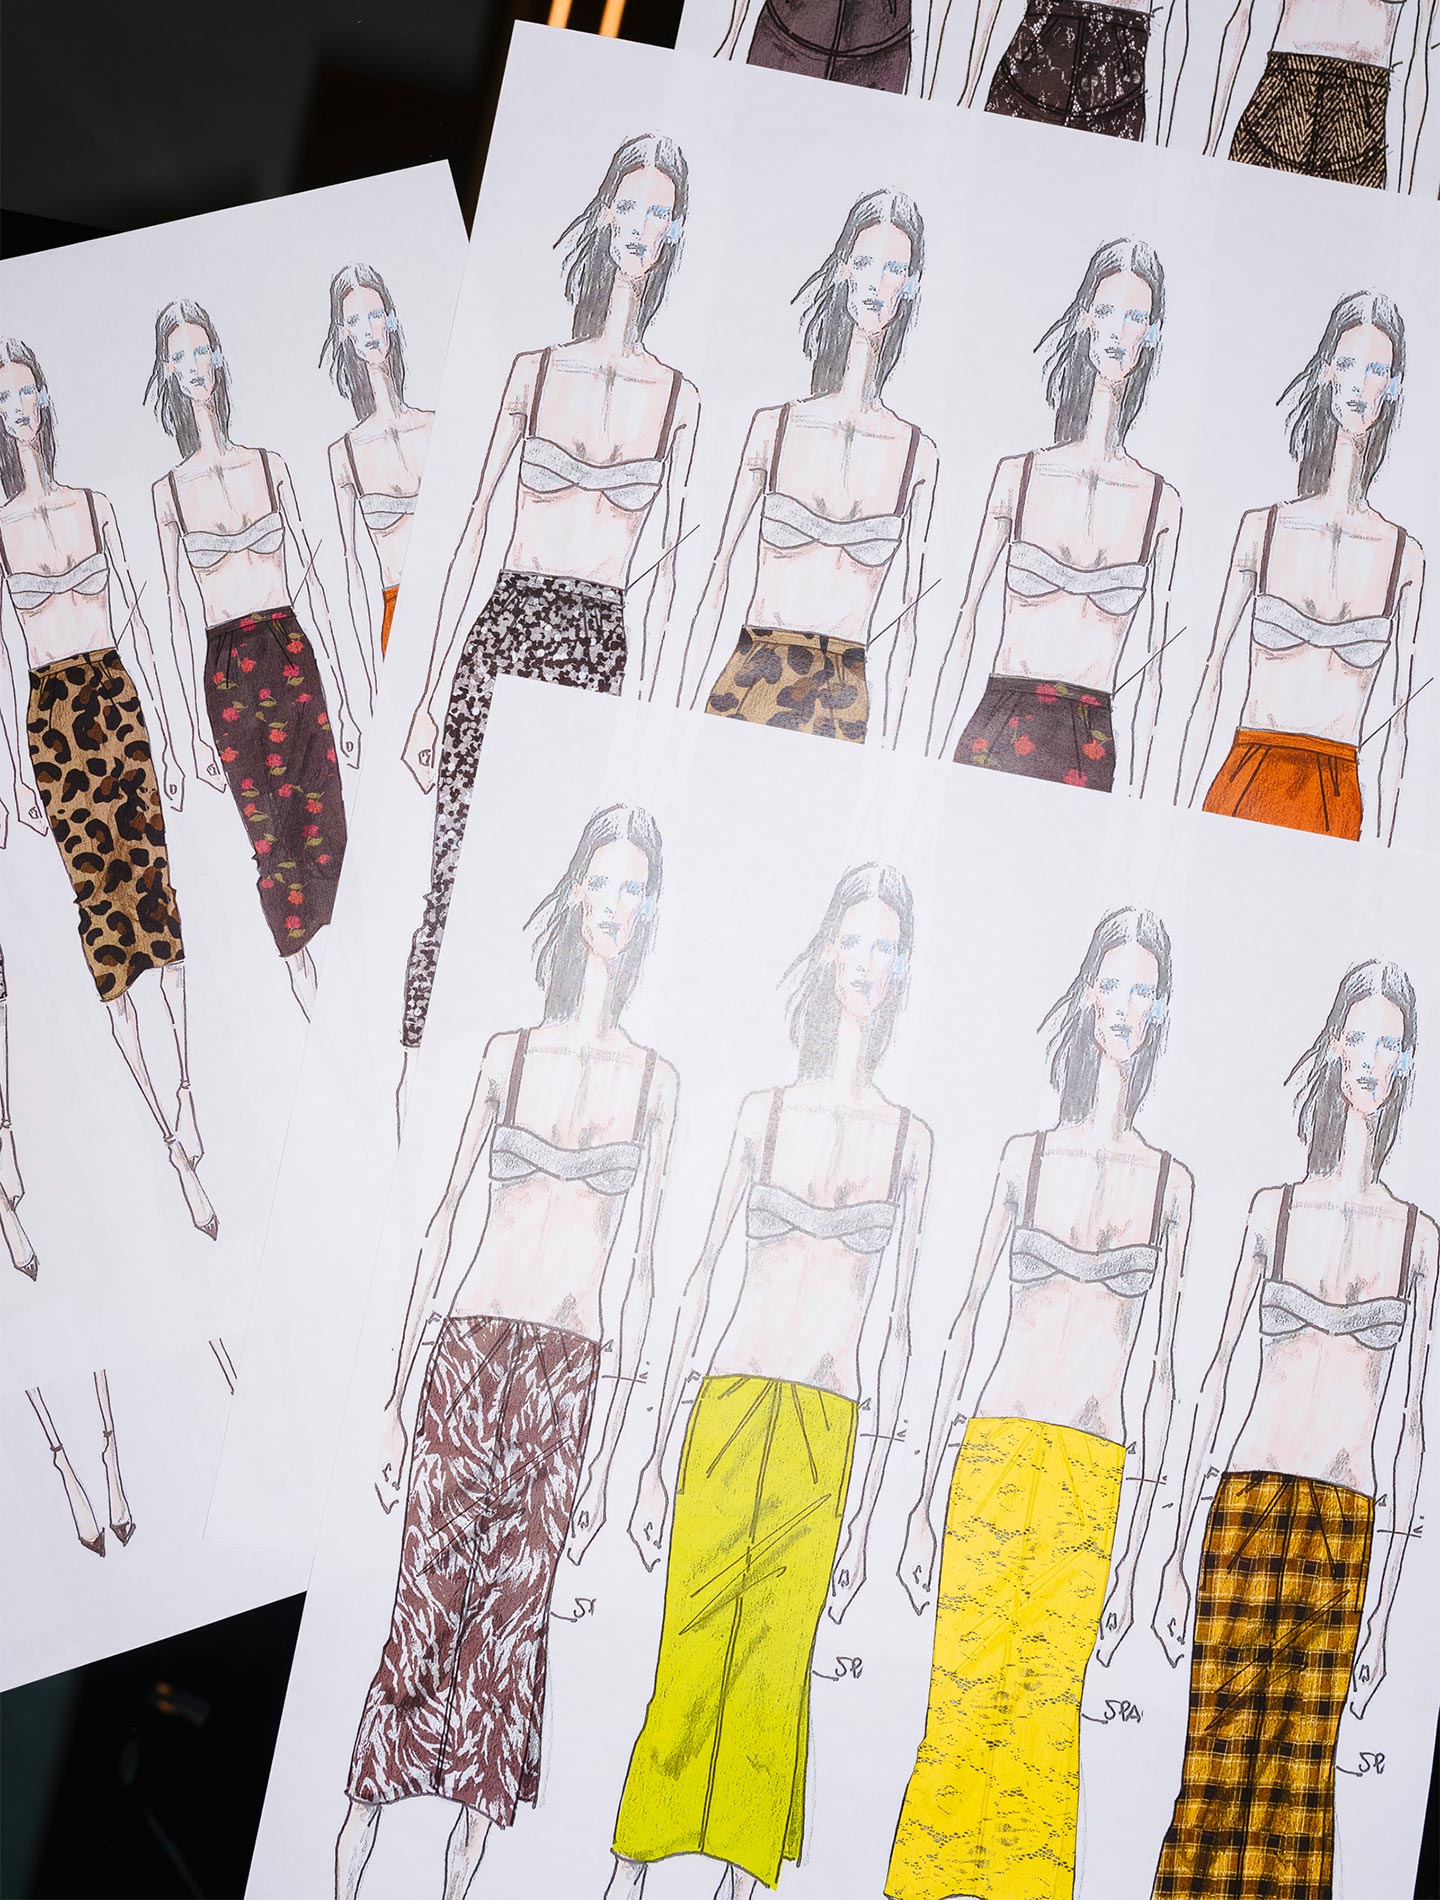 Pencil skirts sketched by Alessandro Dell'Acqua as a signature garment